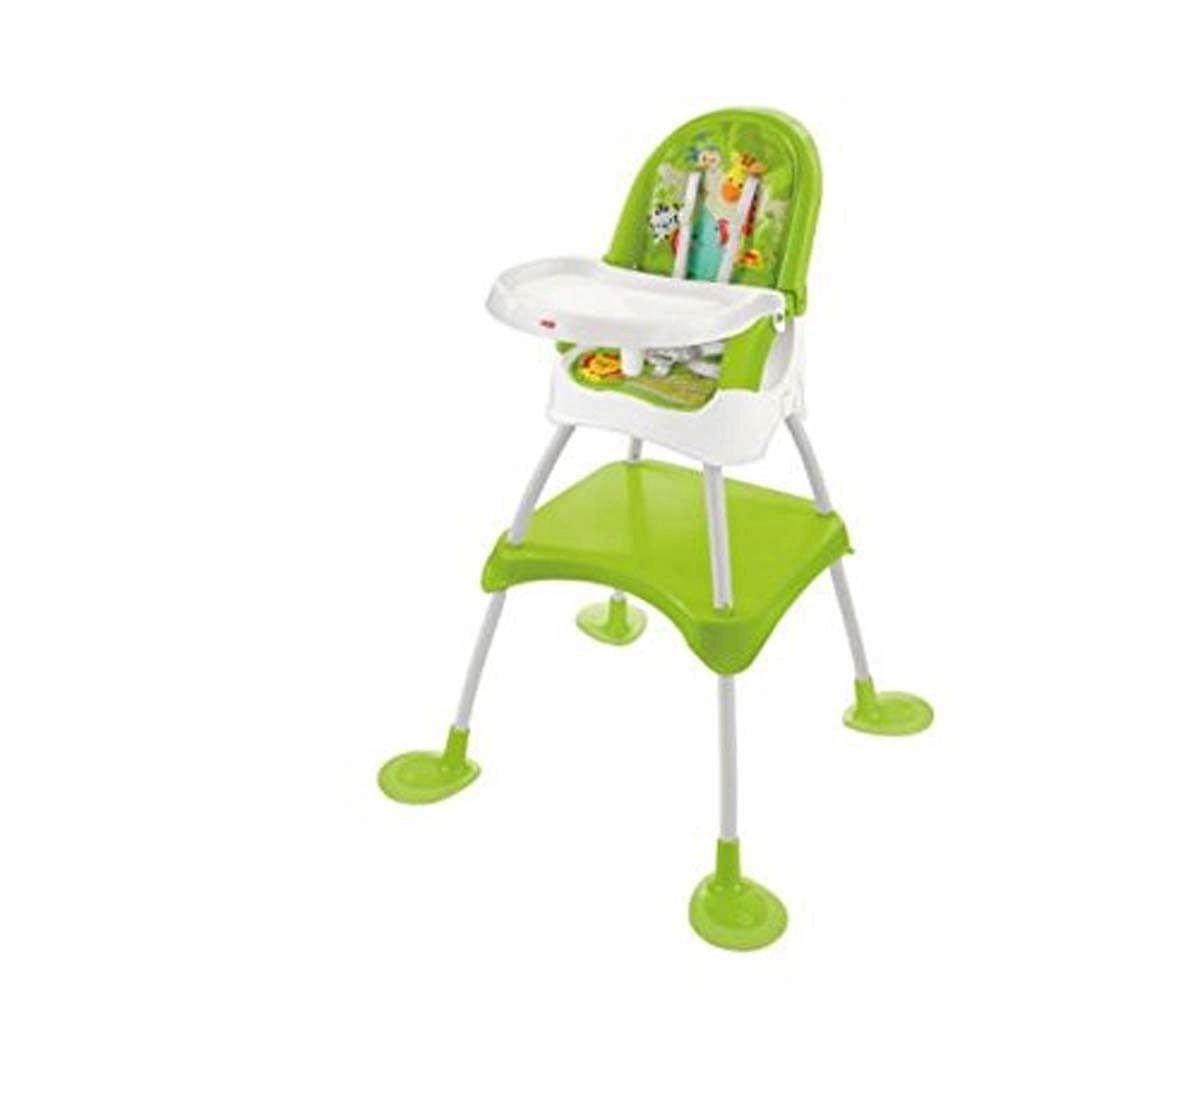 Fisher Price 4-In-1 High Chair (Multicolor) Baby Gear for Kids age 12M+ 